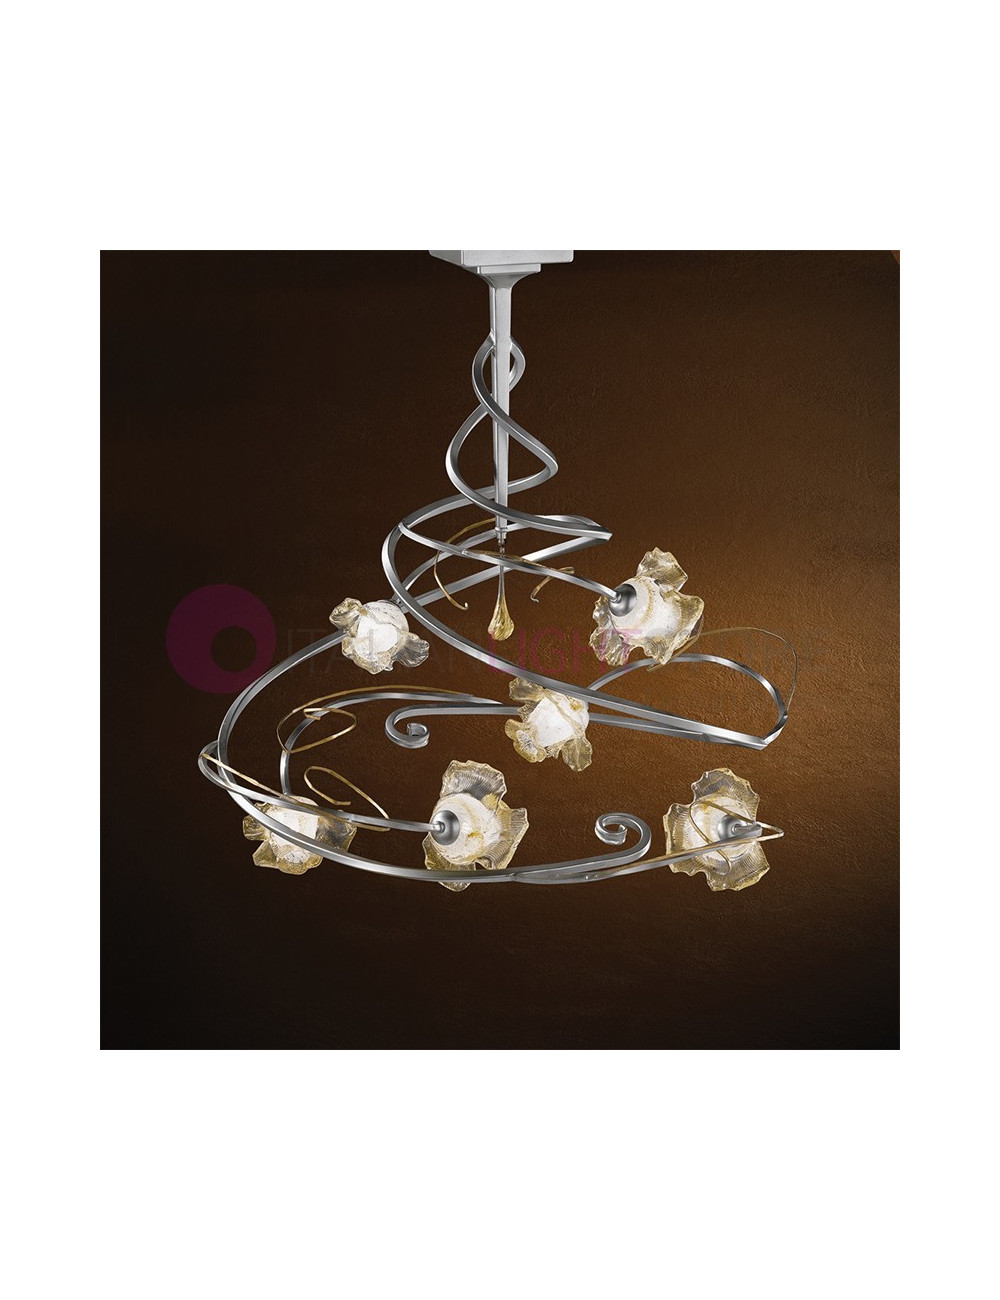 ROSE Modern Ceiling light with 6 lights in Forged Iron | Bellart